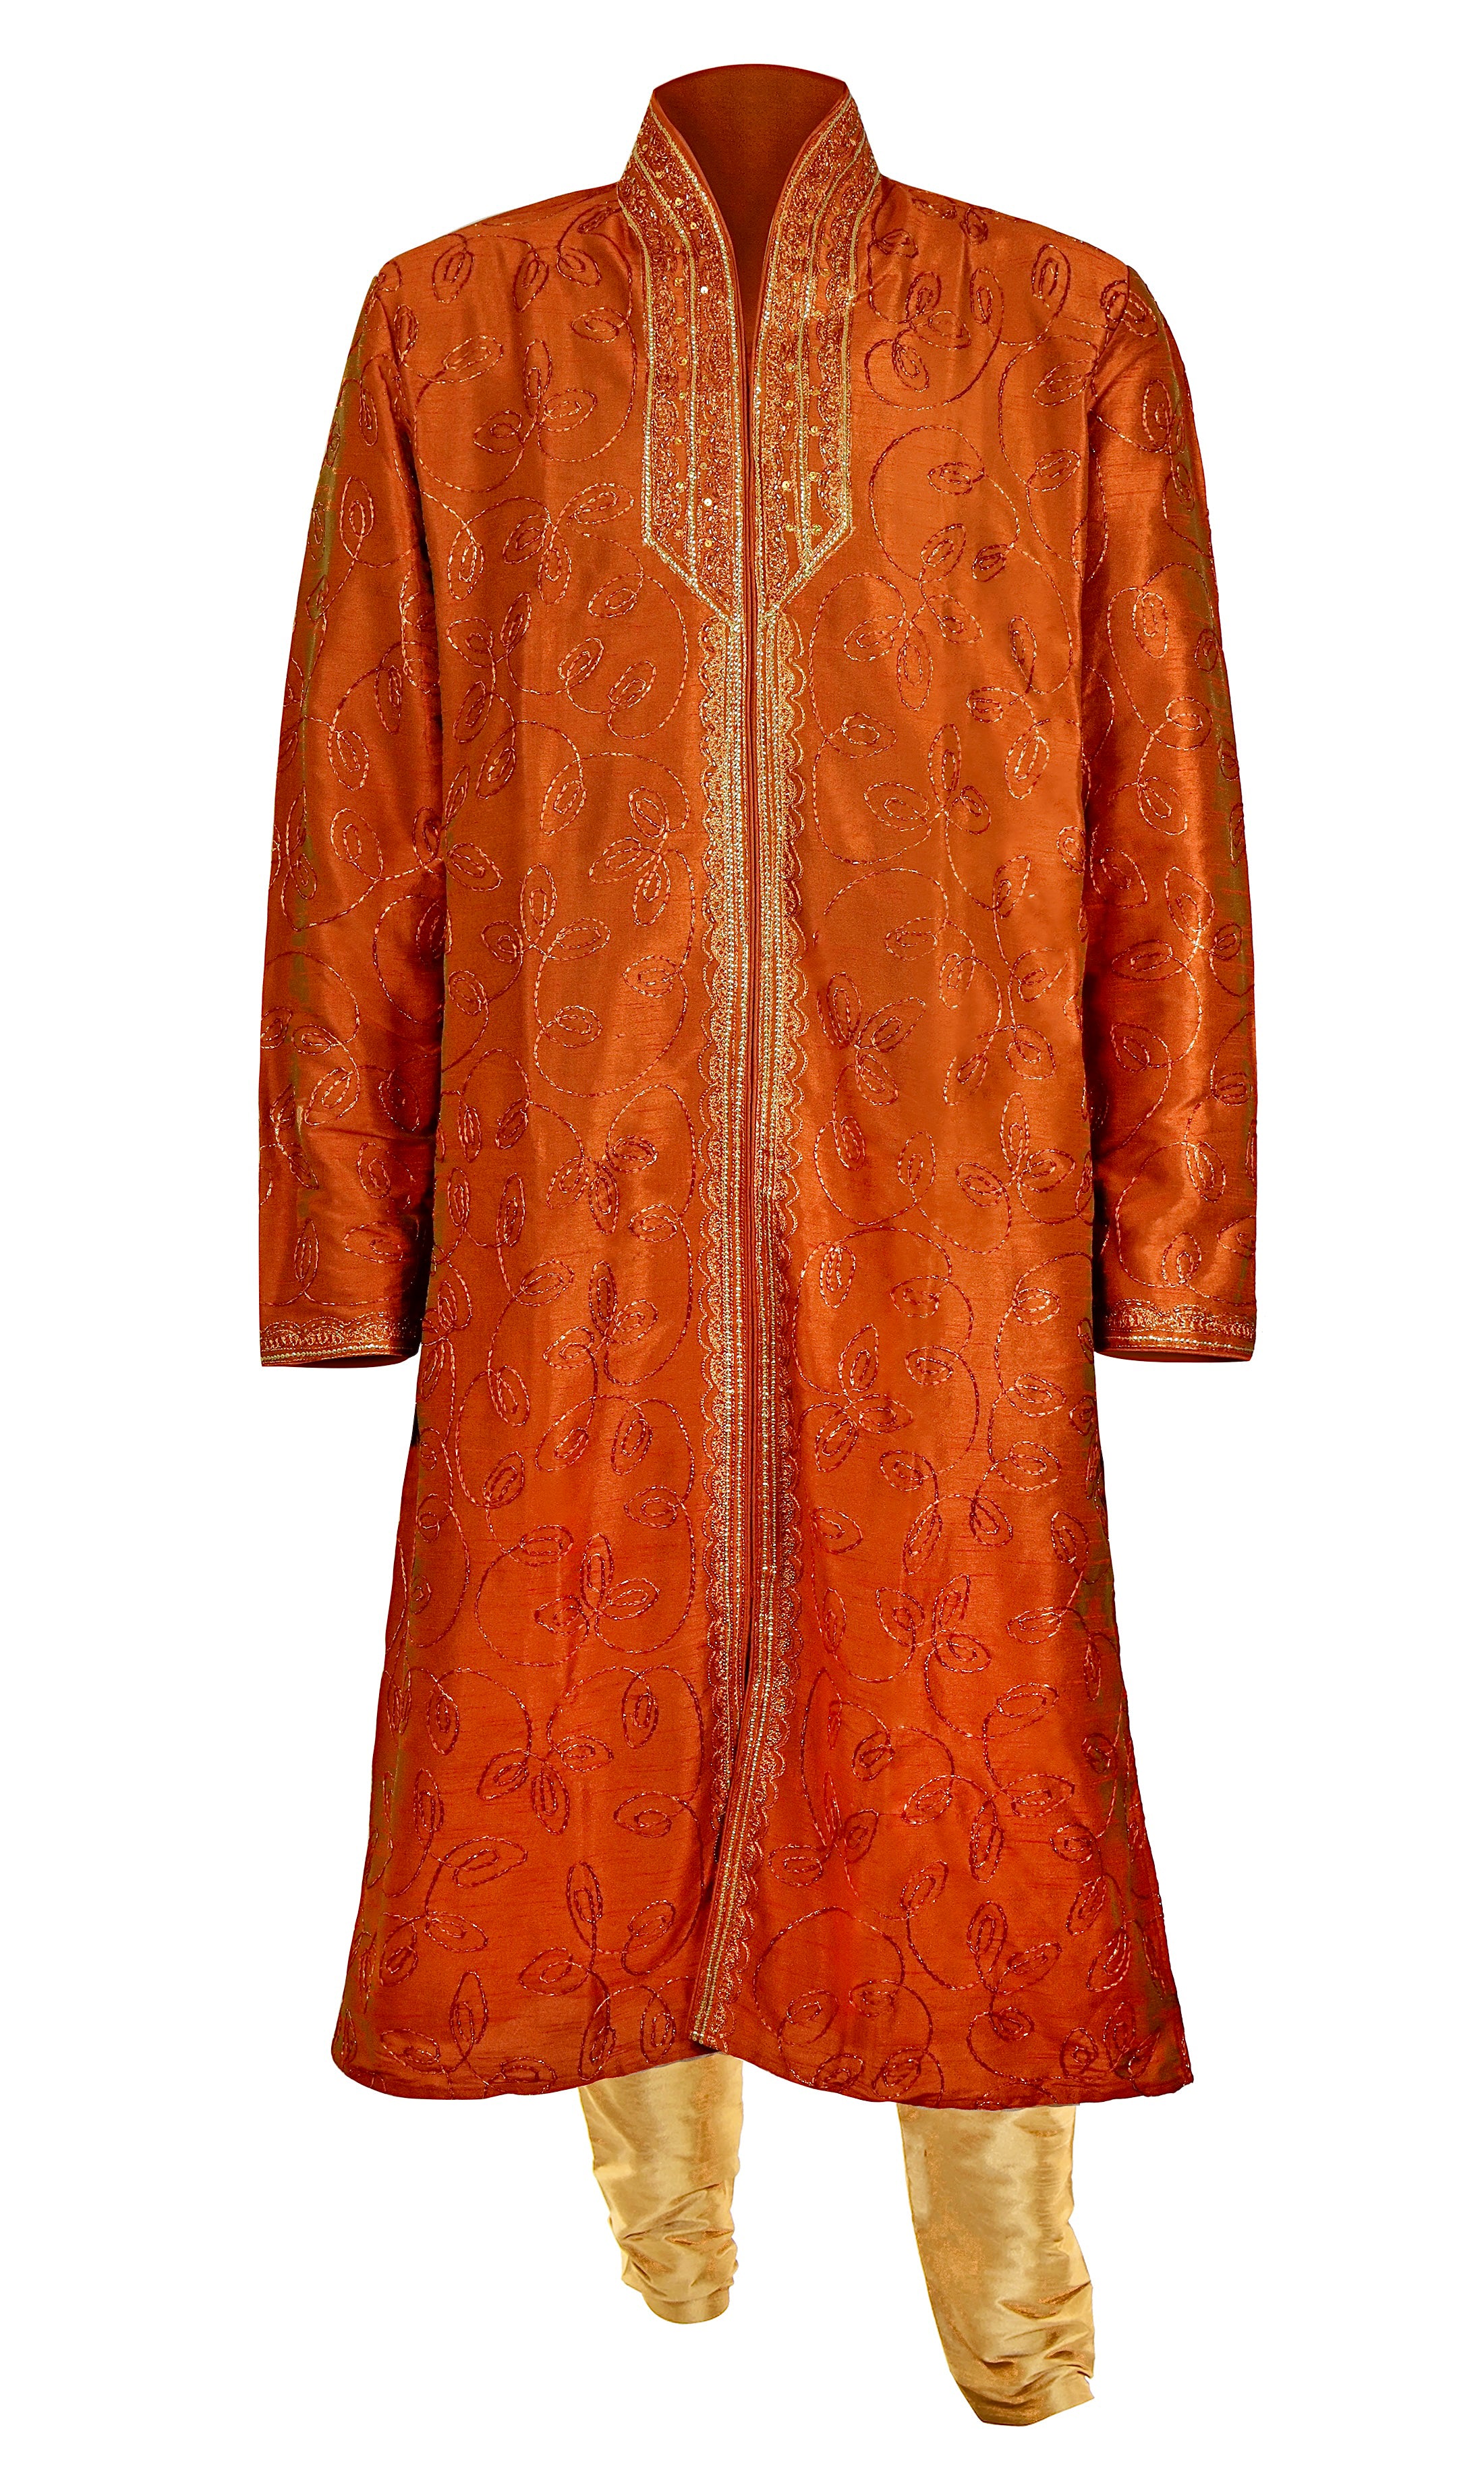 Dark orange silk kurta with gold beads and sequins embroidered & with gold pants